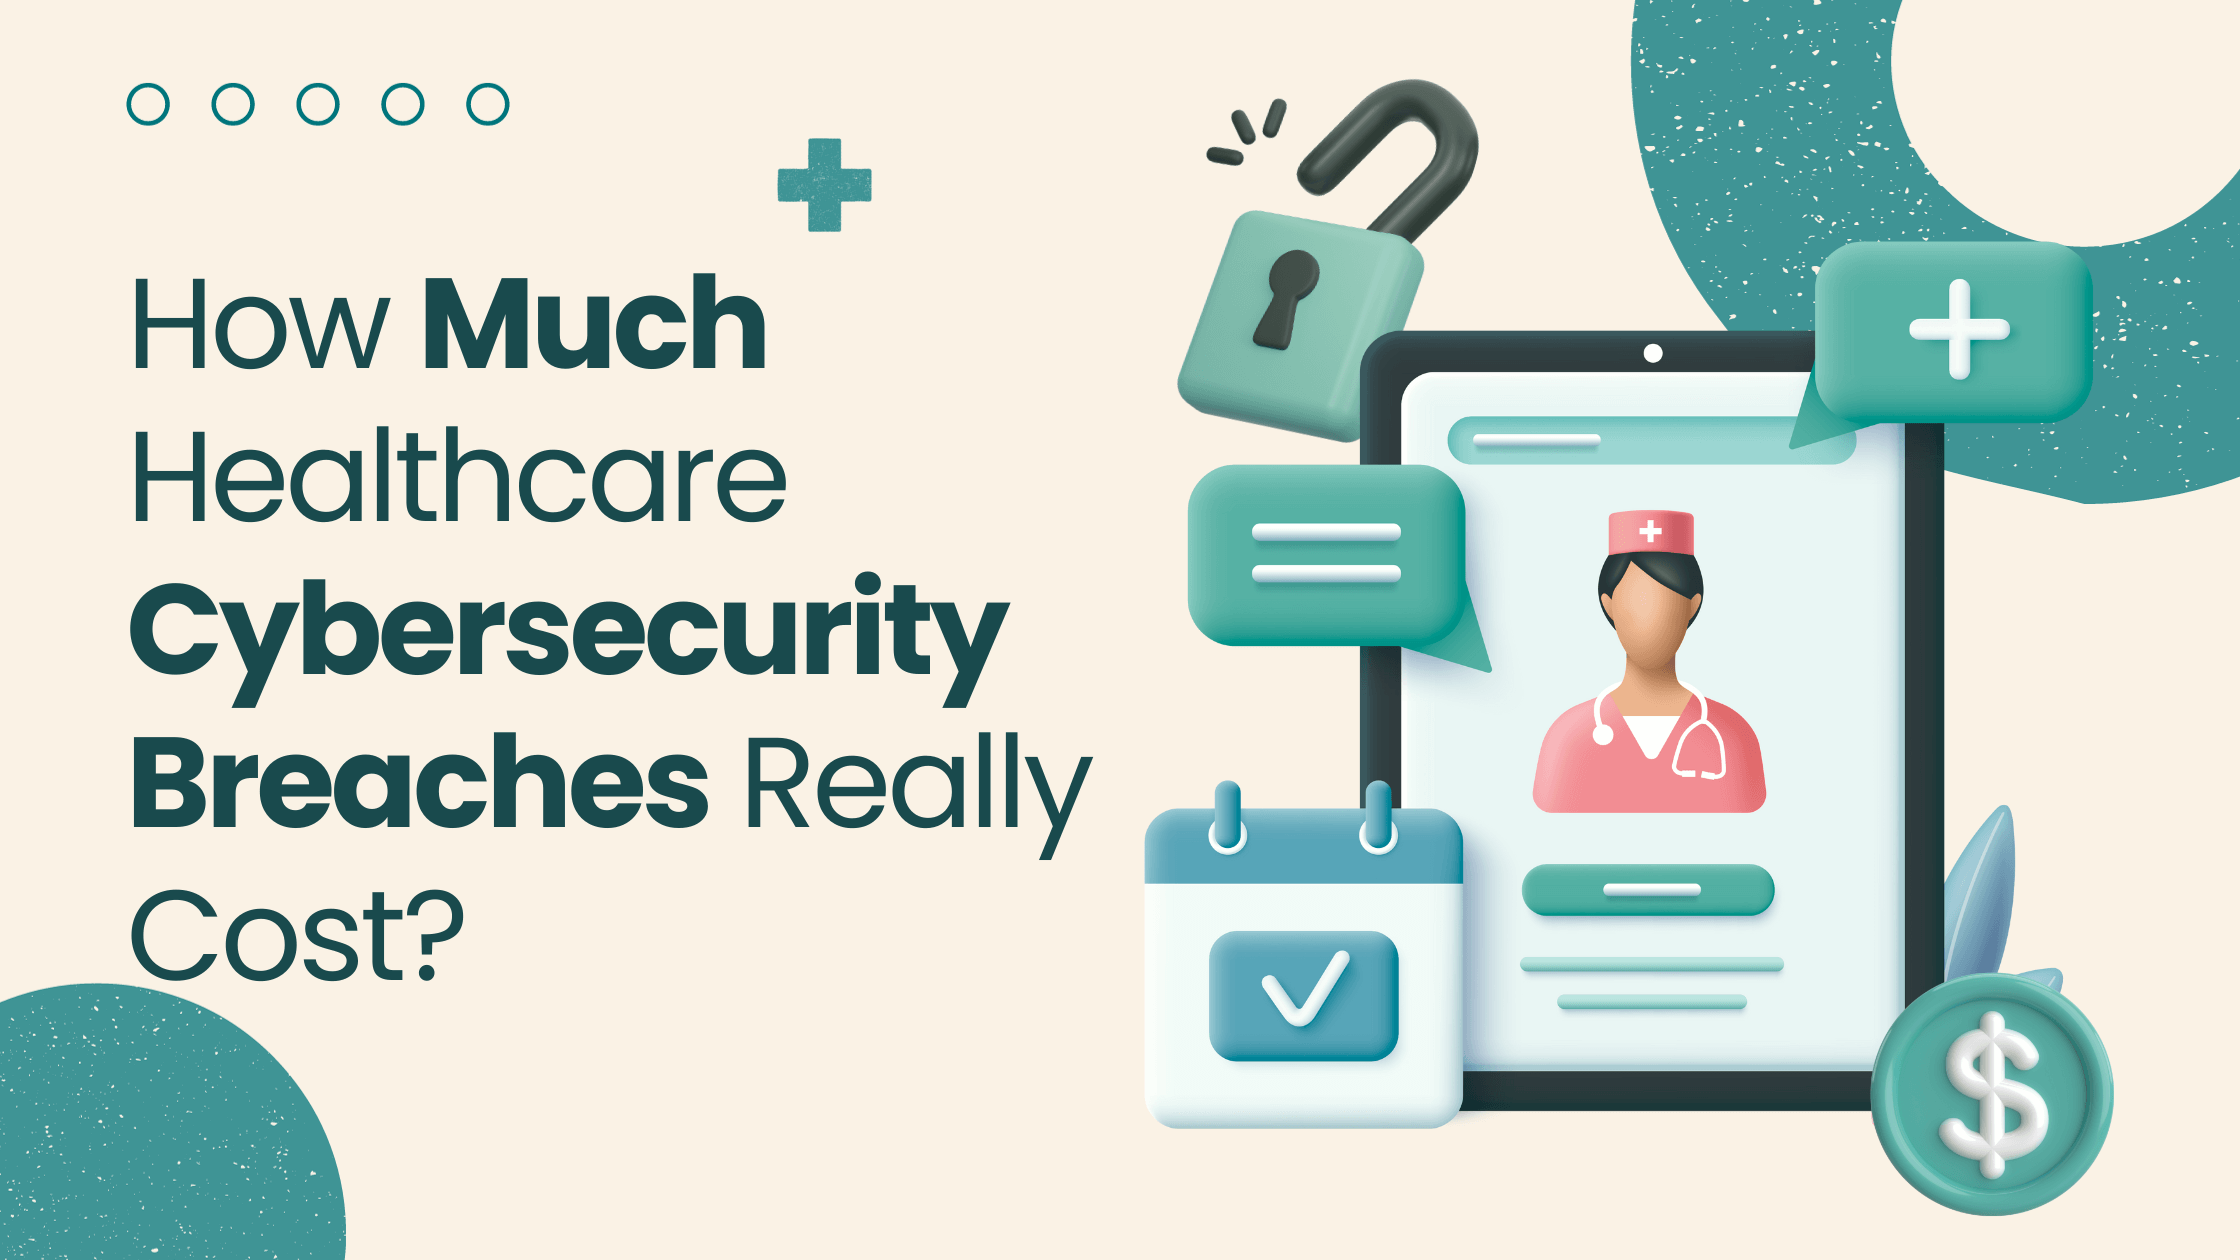 How Much Healthcare Cybersecurity Breaches Really Cost